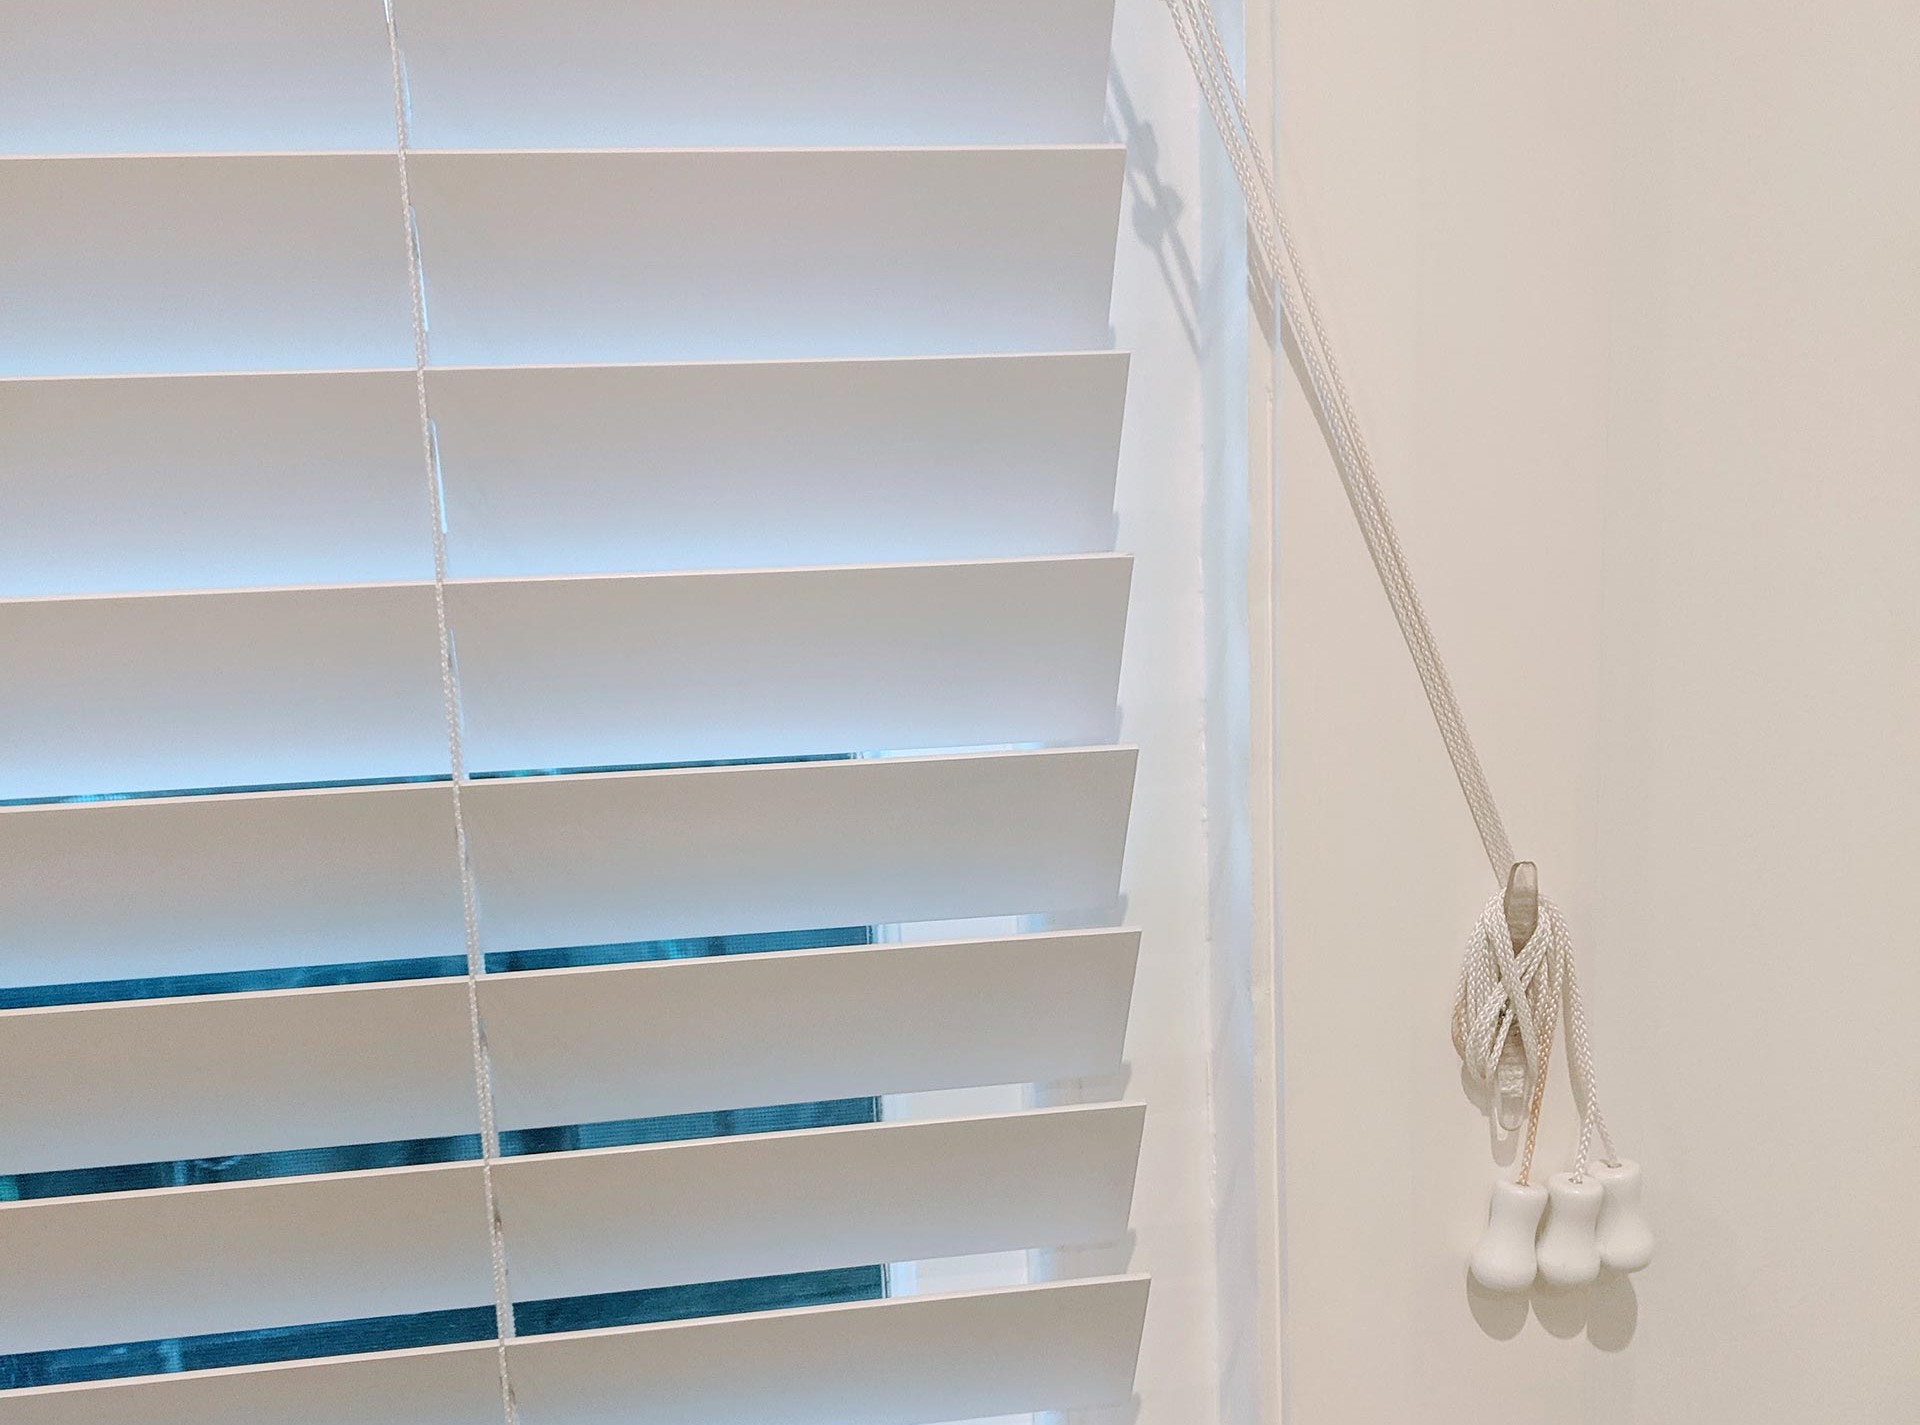 How To Pull Down Blinds With 3 Strings